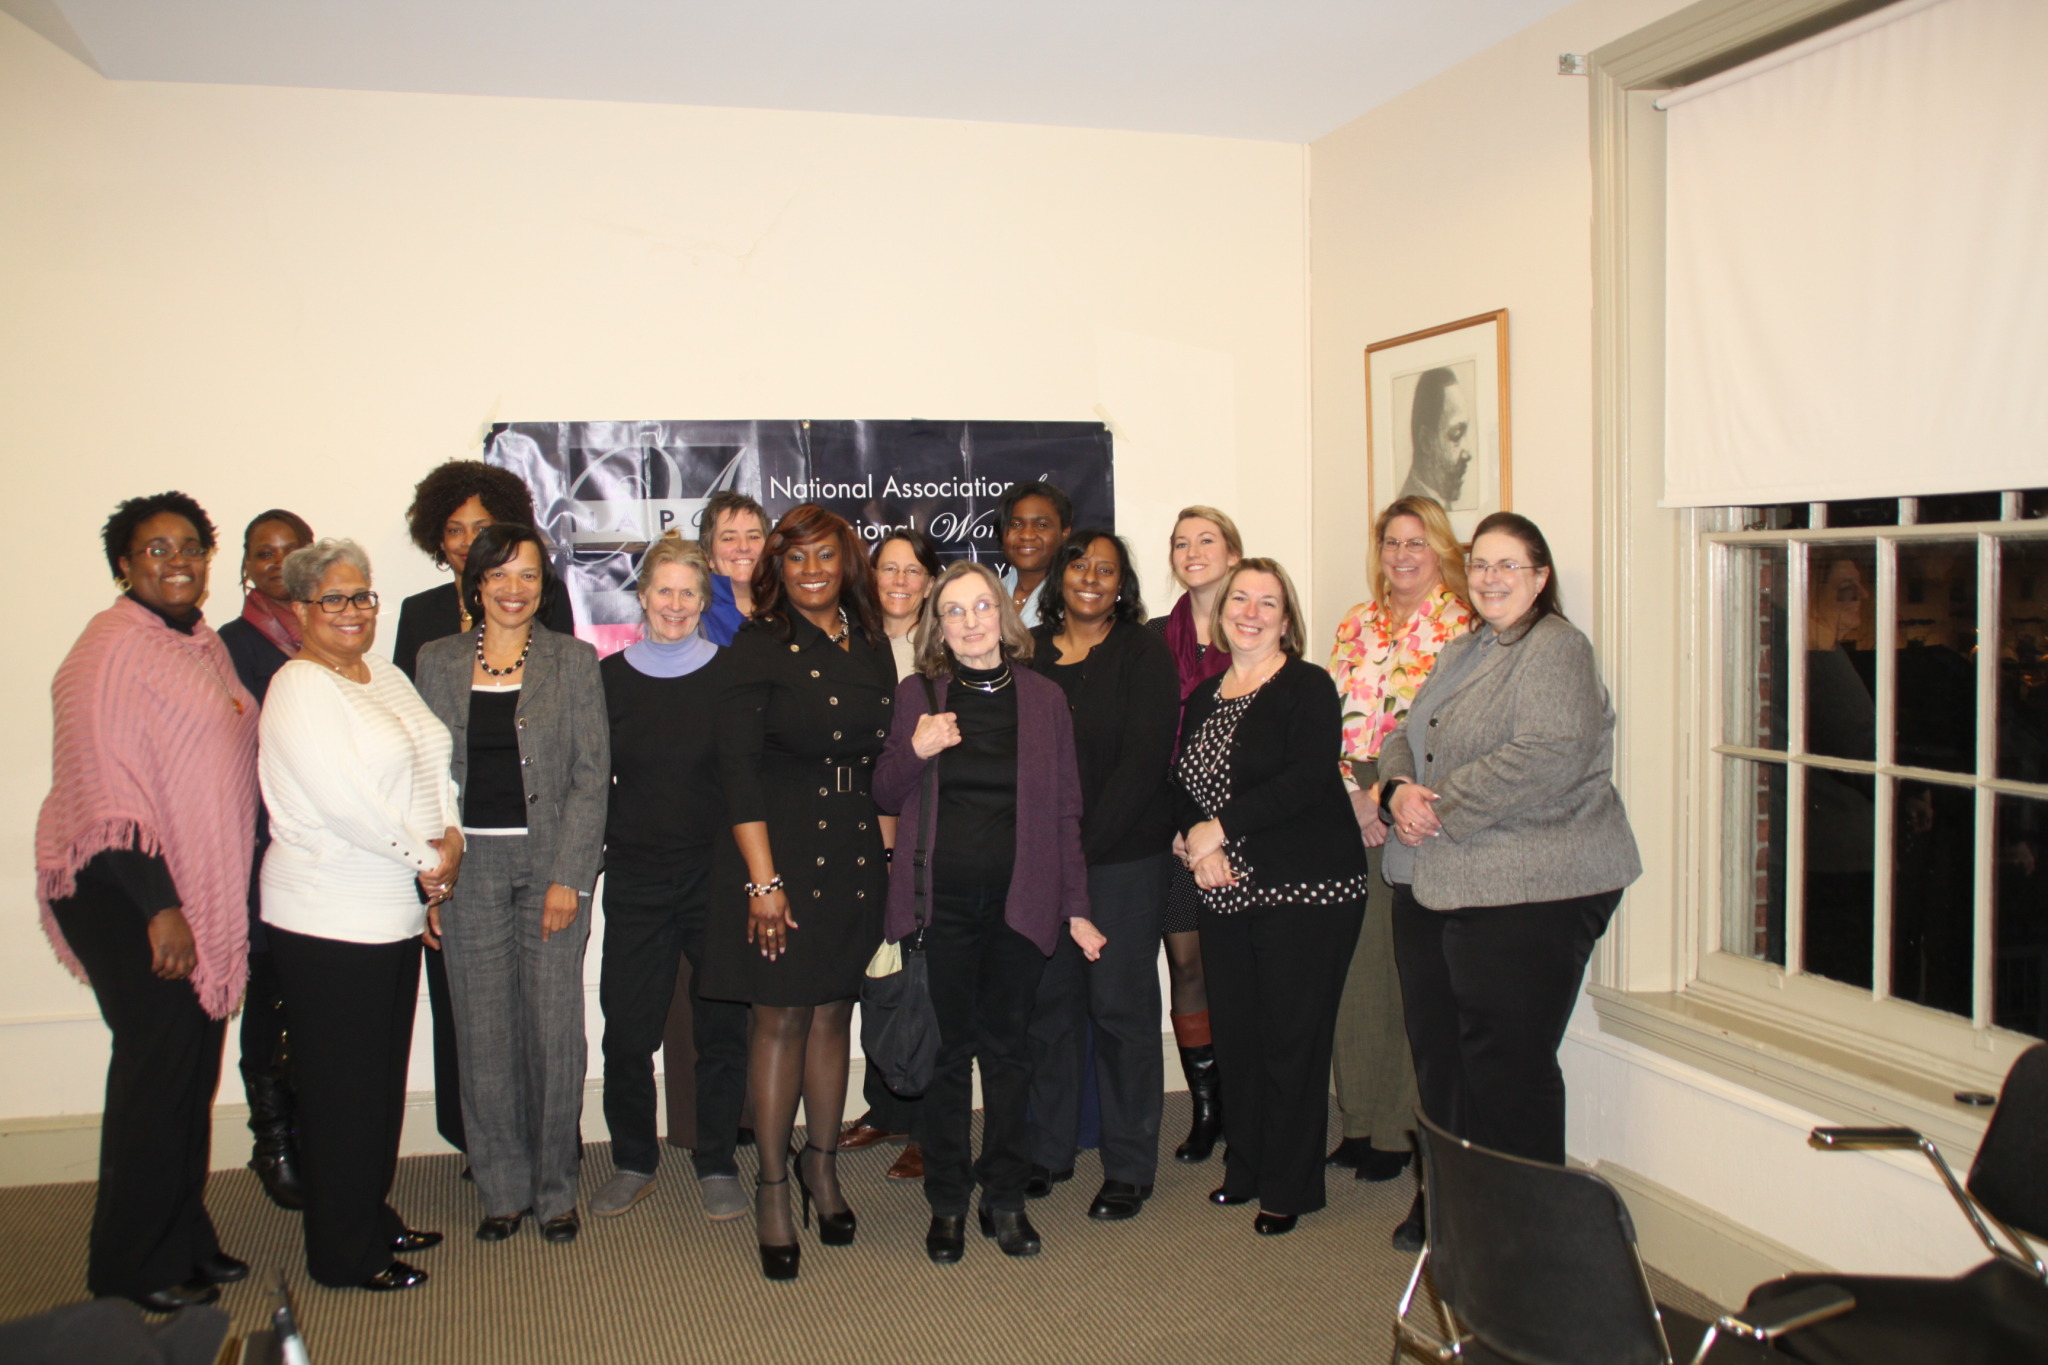 Members of the NAPW King of Prussia, PA Local Chapter Celebrate Women's History Month